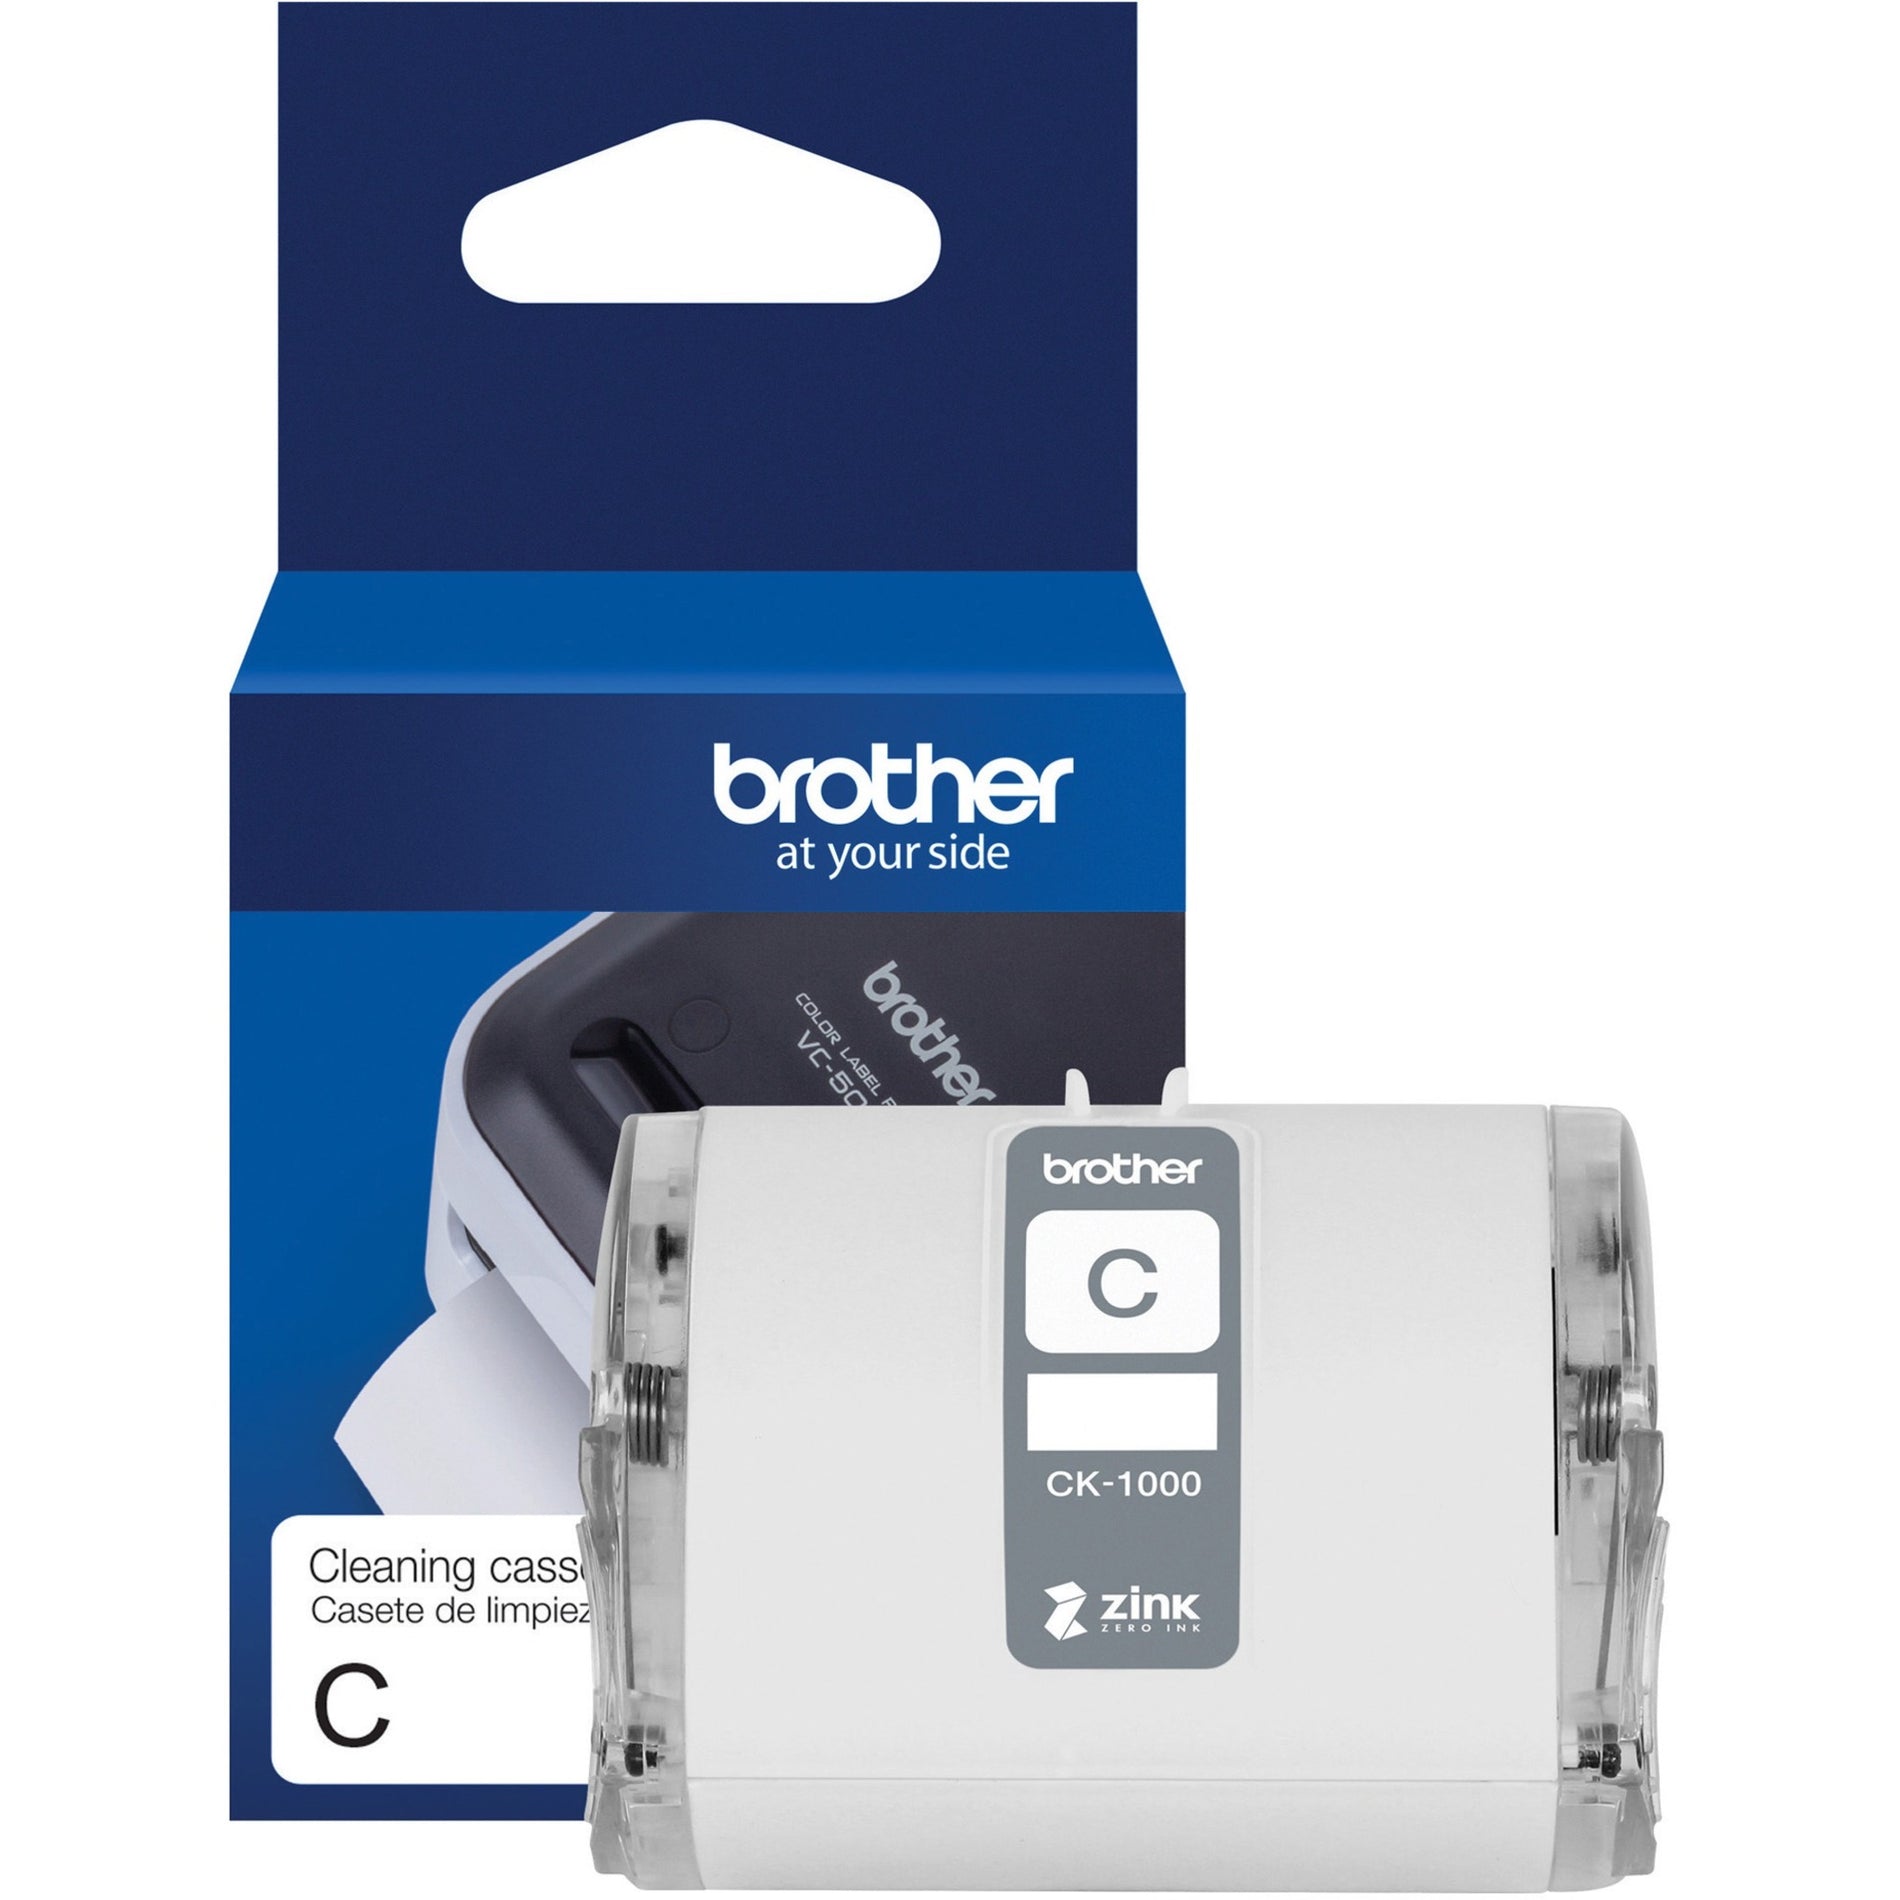 Brother CK-1000 Print Head Cleaning Roll, 50mm wide - Printer Head Cleaner